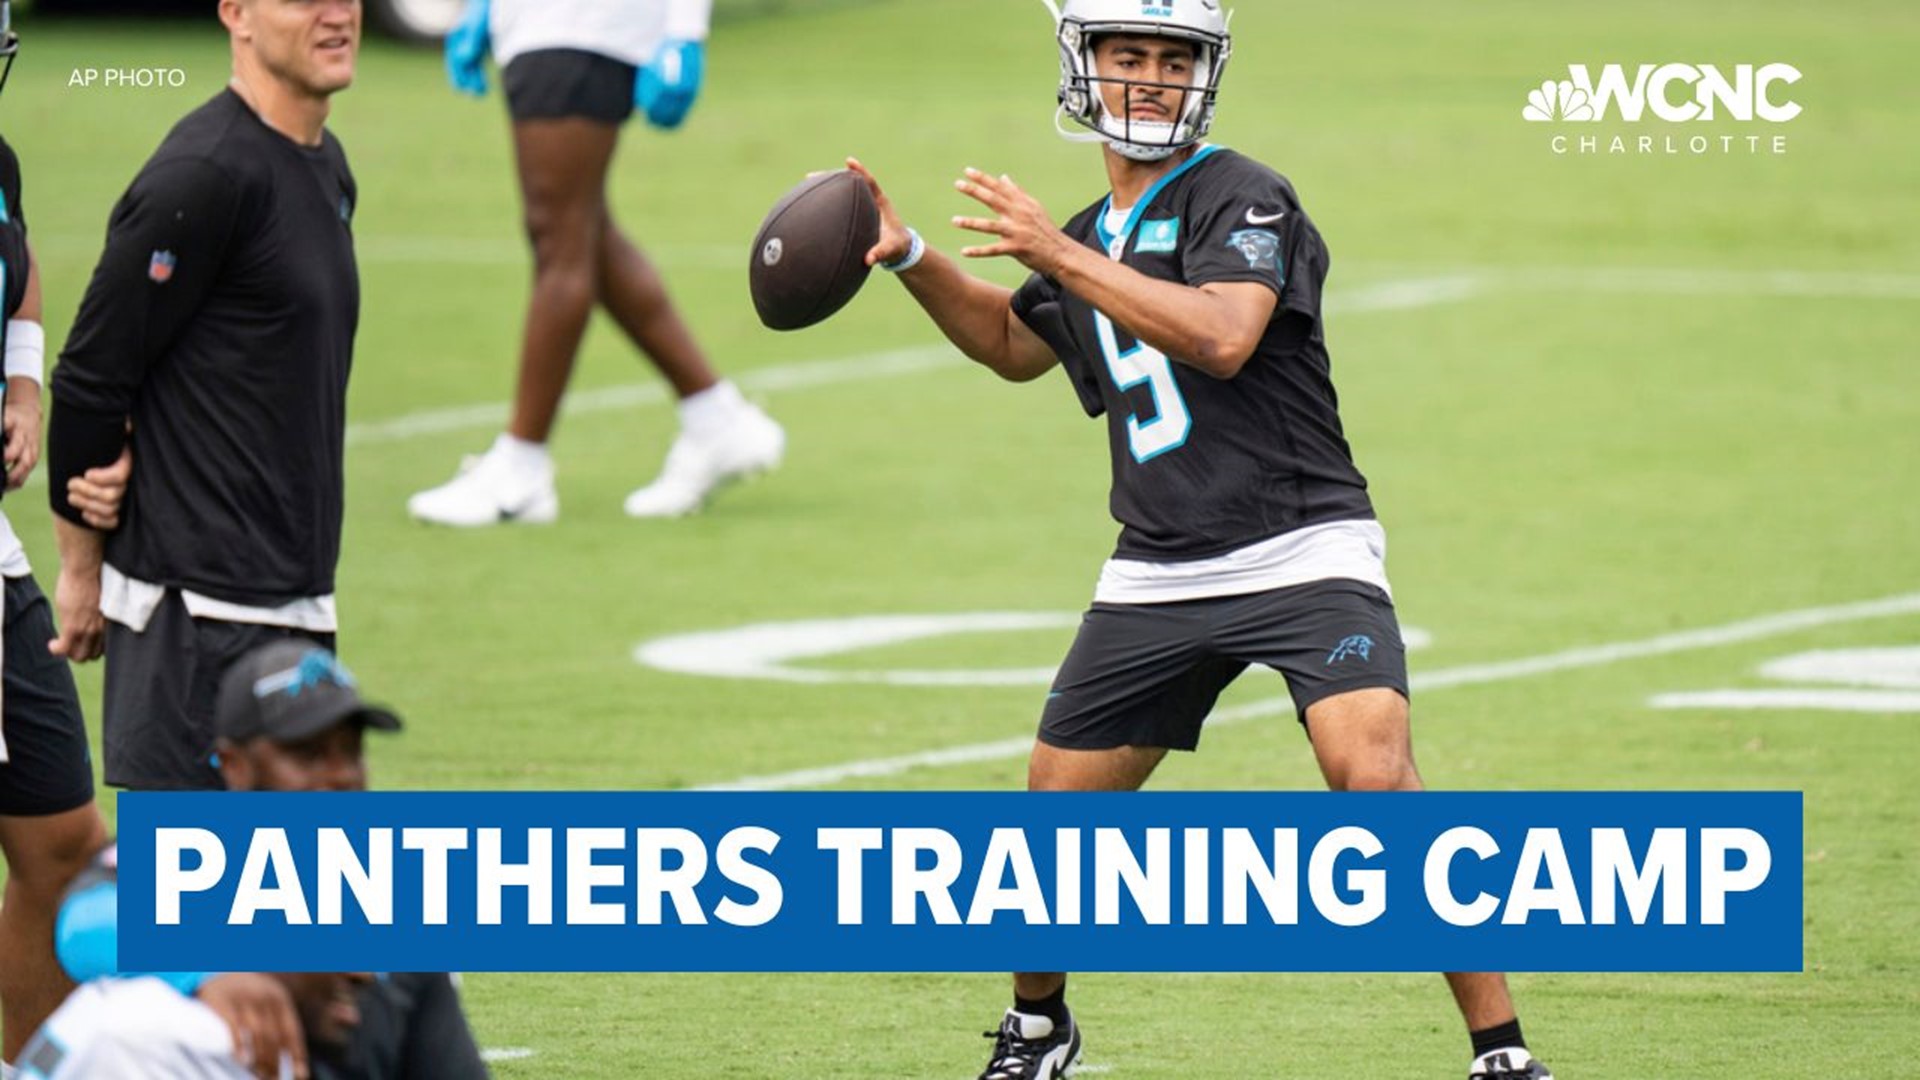 Training camp continues in Spartanburg for the Carolina Panthers. The players are using pads for the first time today.